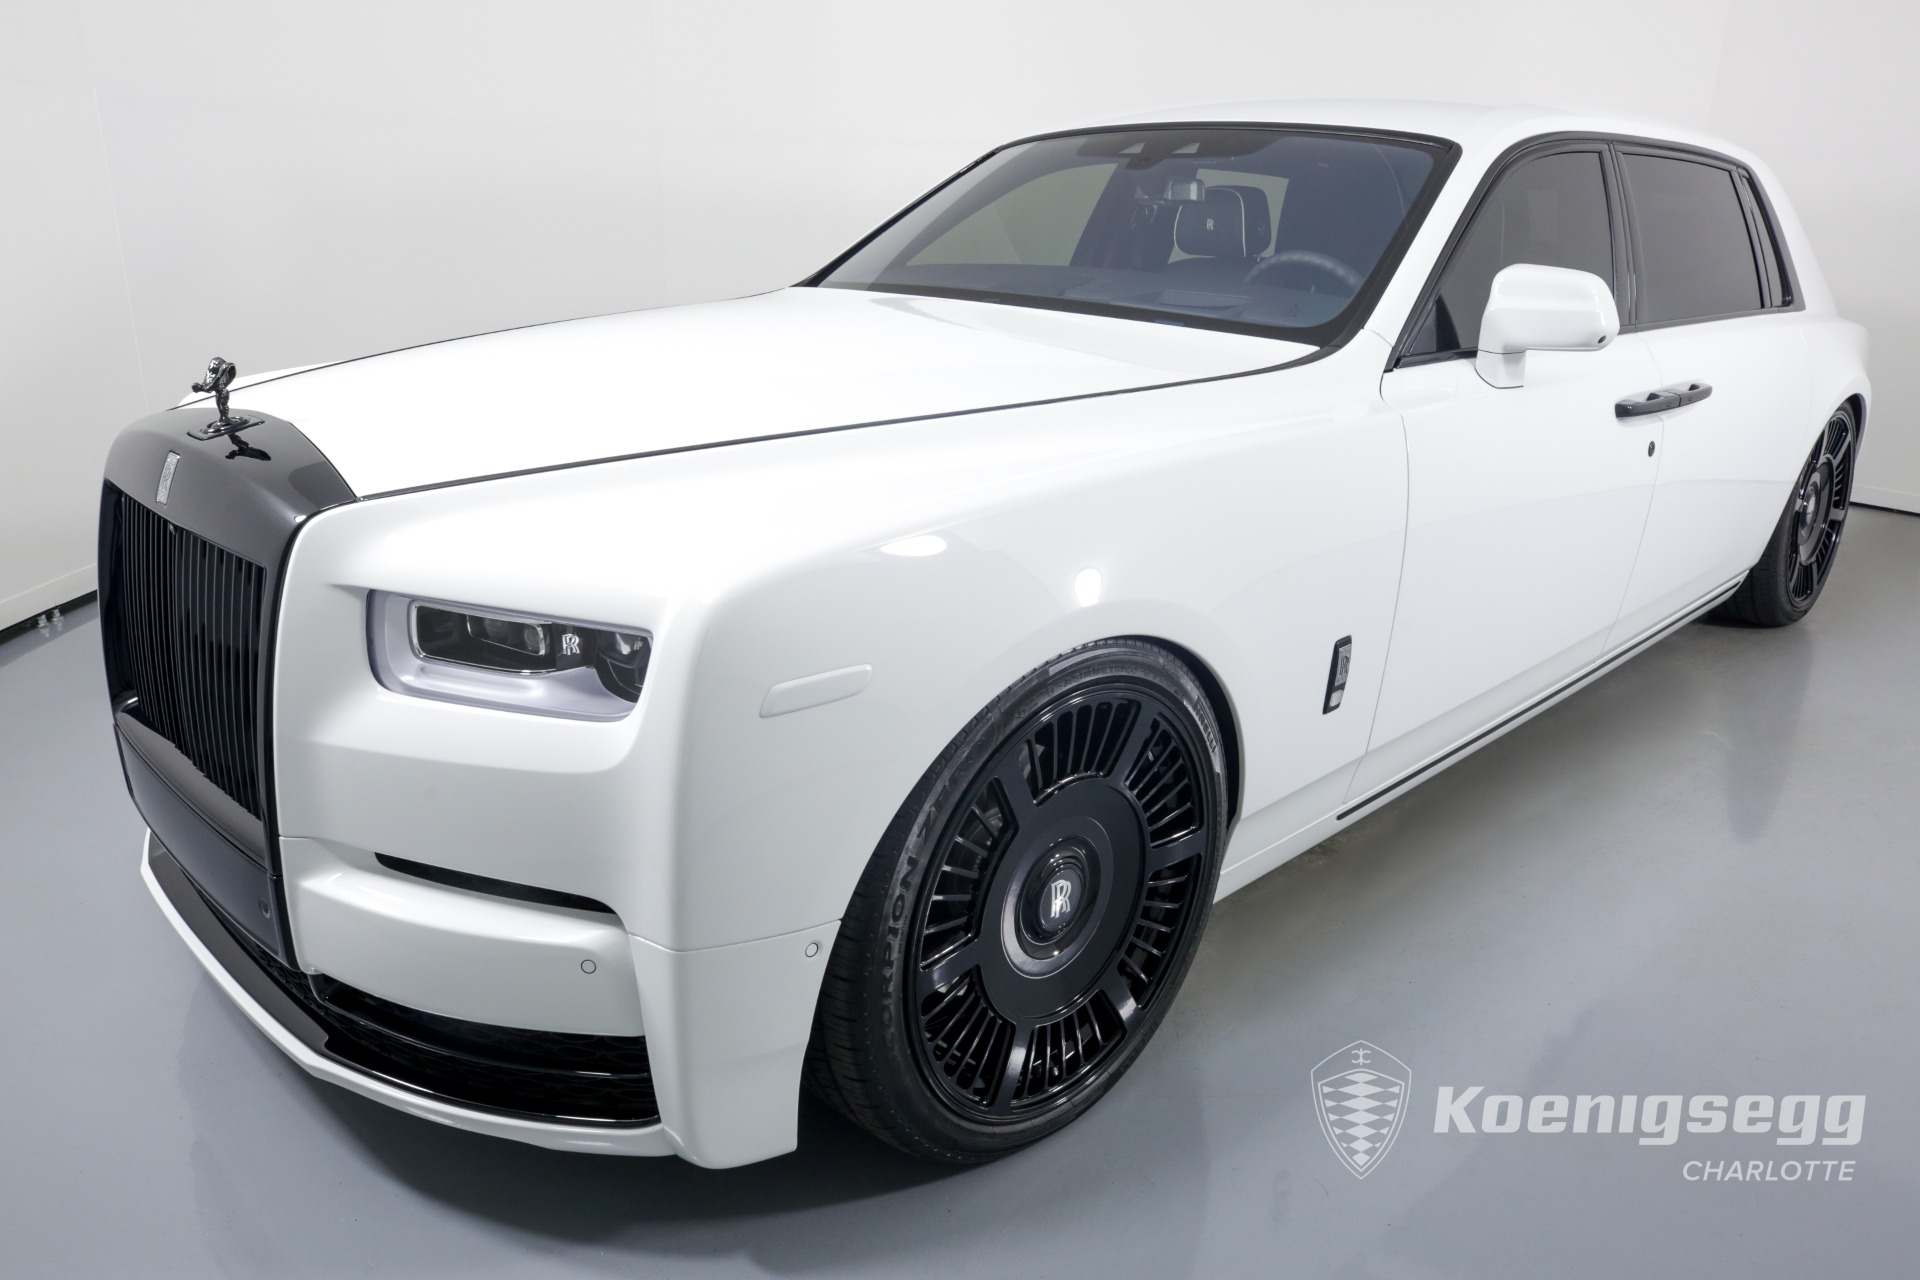 2022 RollsRoyce Ghost Prices Reviews and Photos  MotorTrend